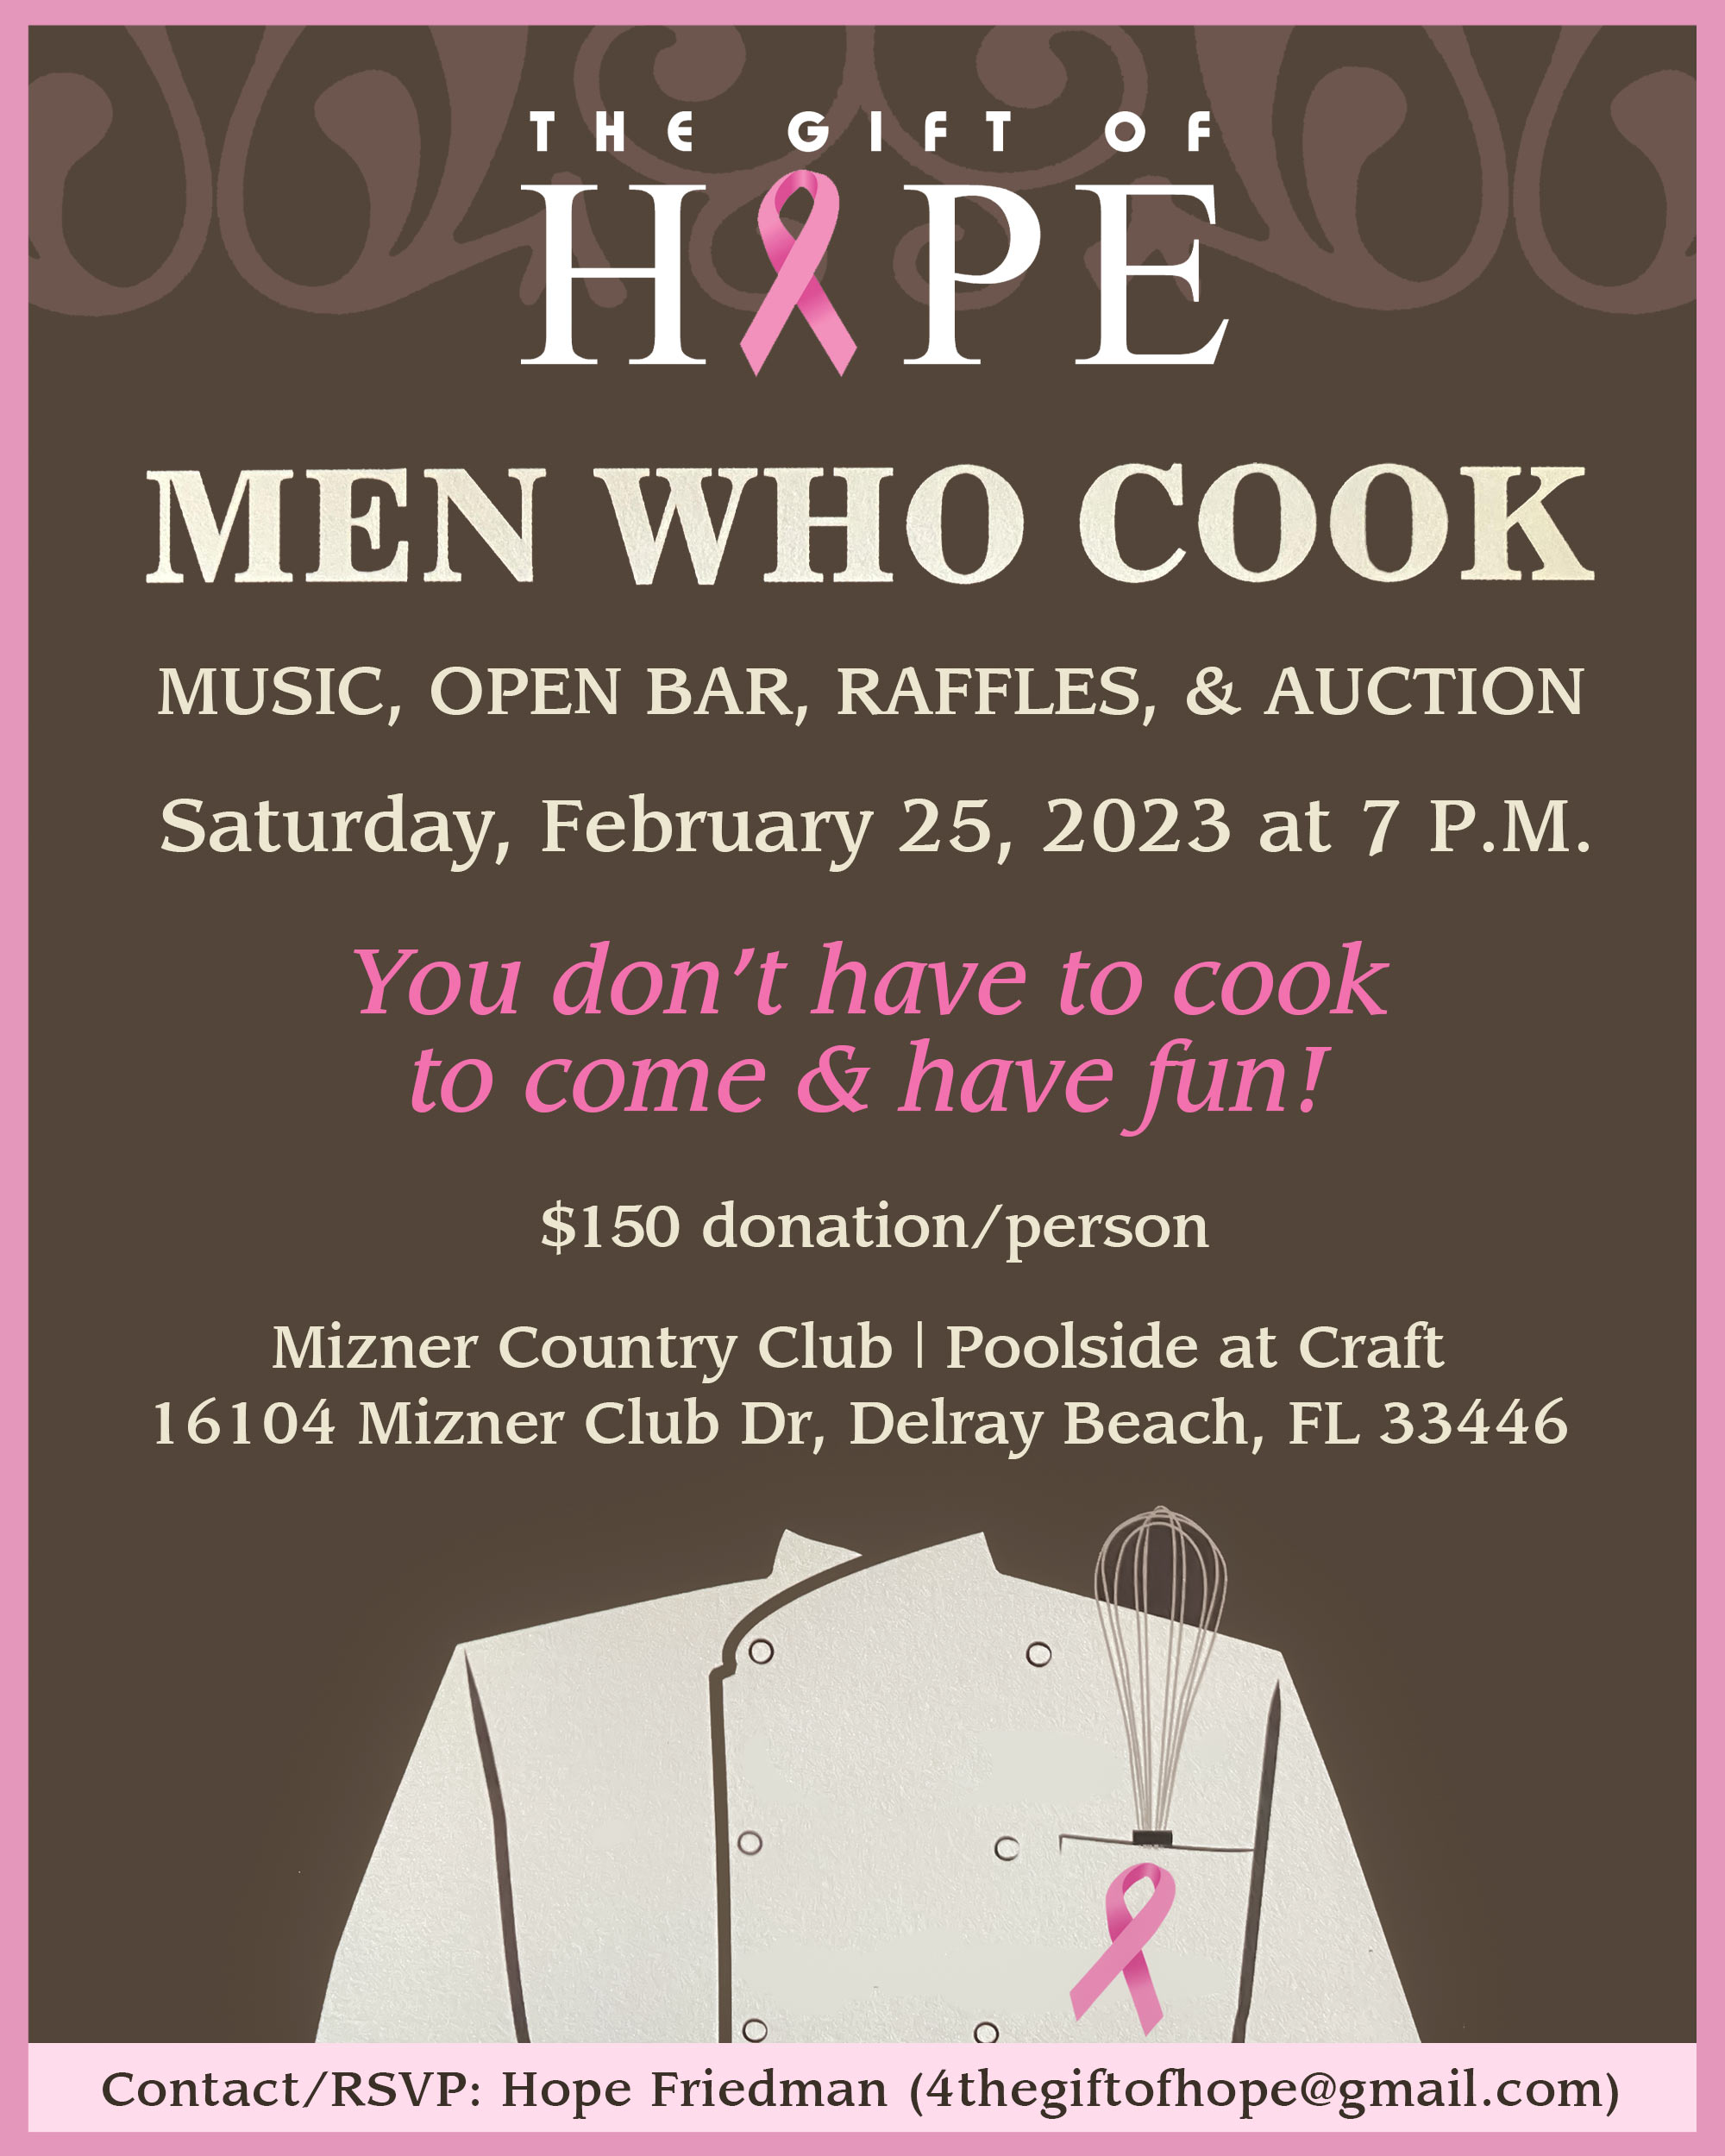 The 11th Annual Men Who Cook - 2023 - For The Gift of Hope